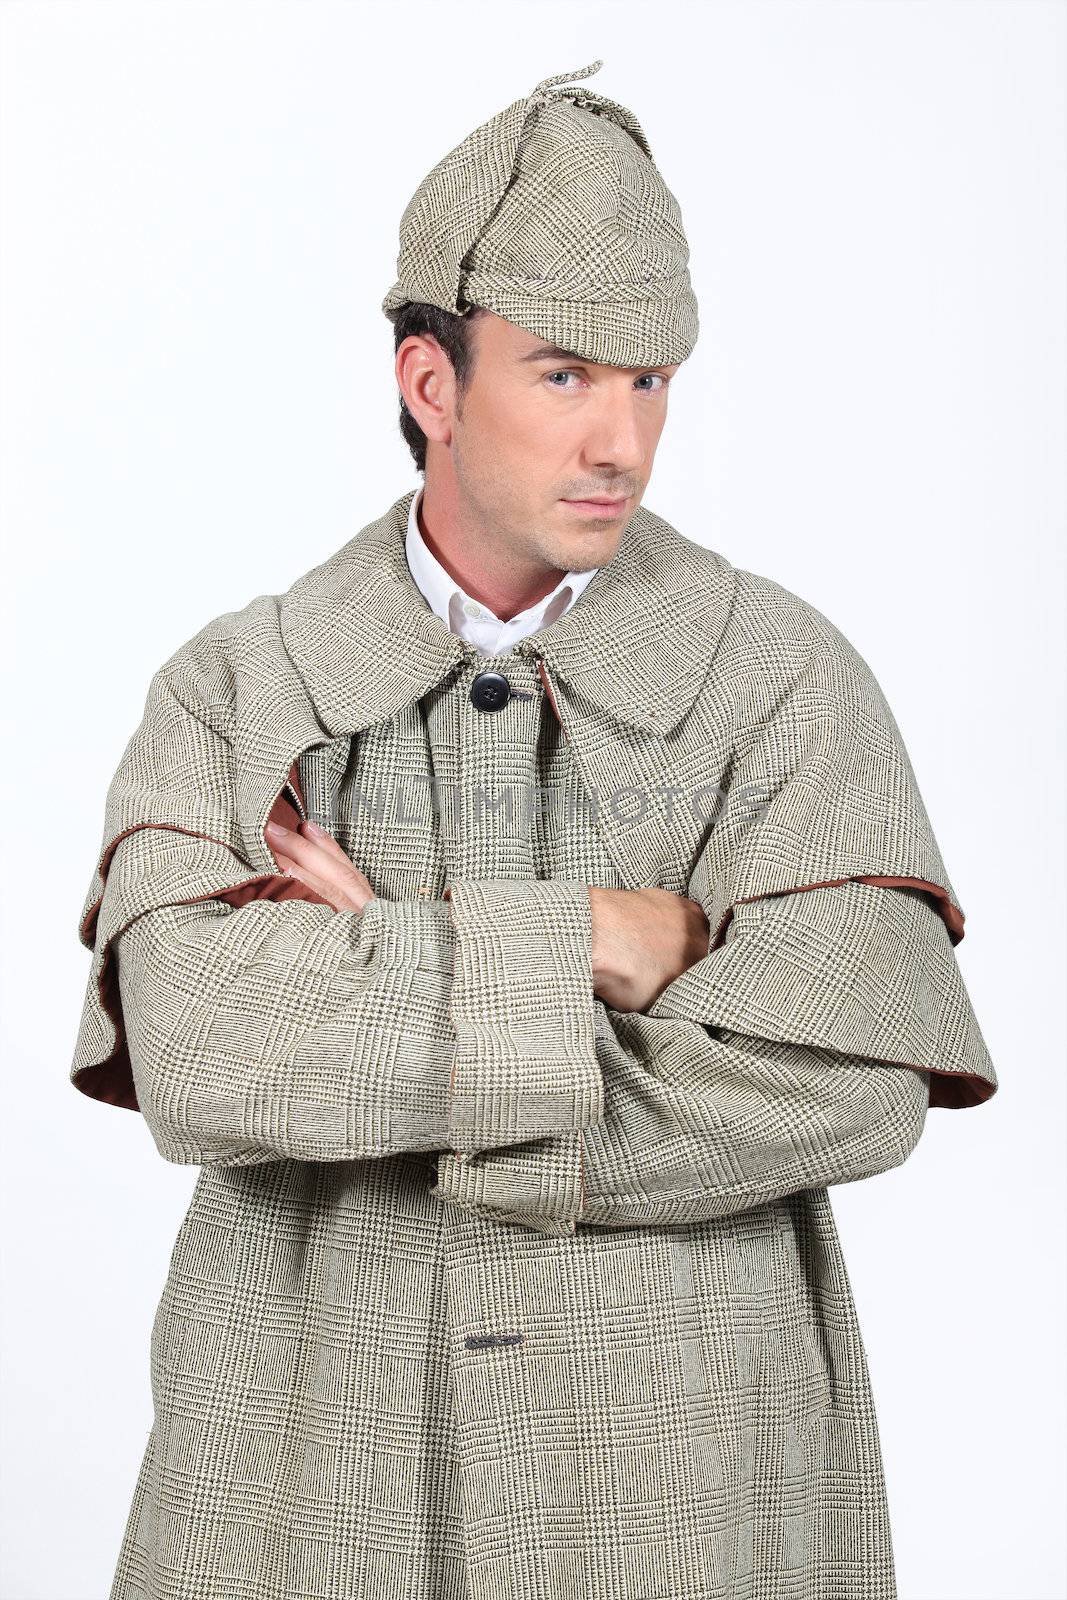 Man in Sherlock Holmes outfit